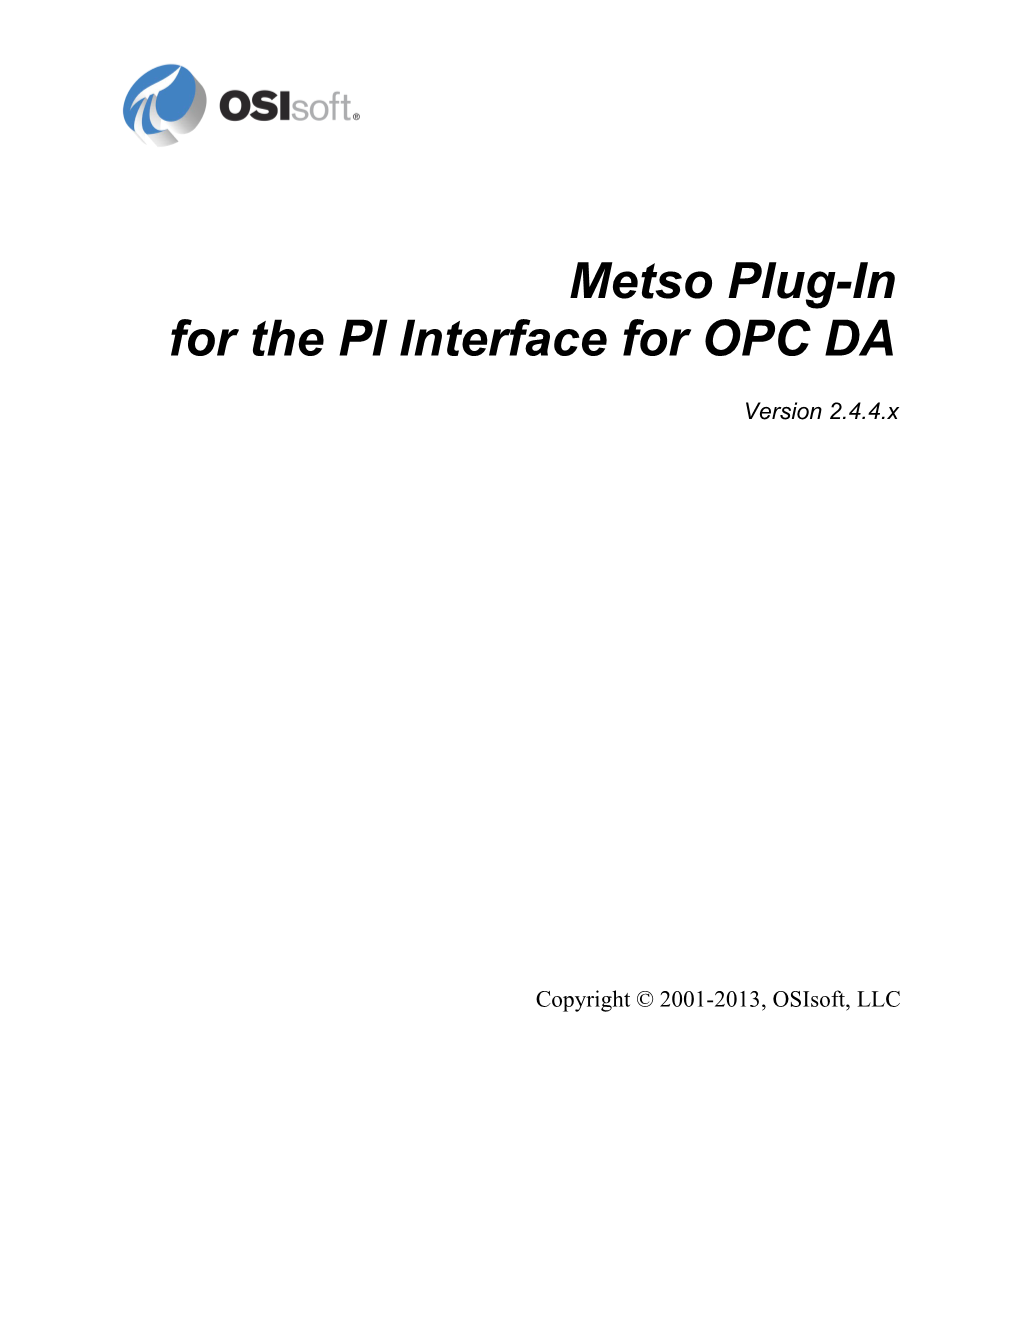 Metso Plug-In DLL for OPC DA Interface to the PI System